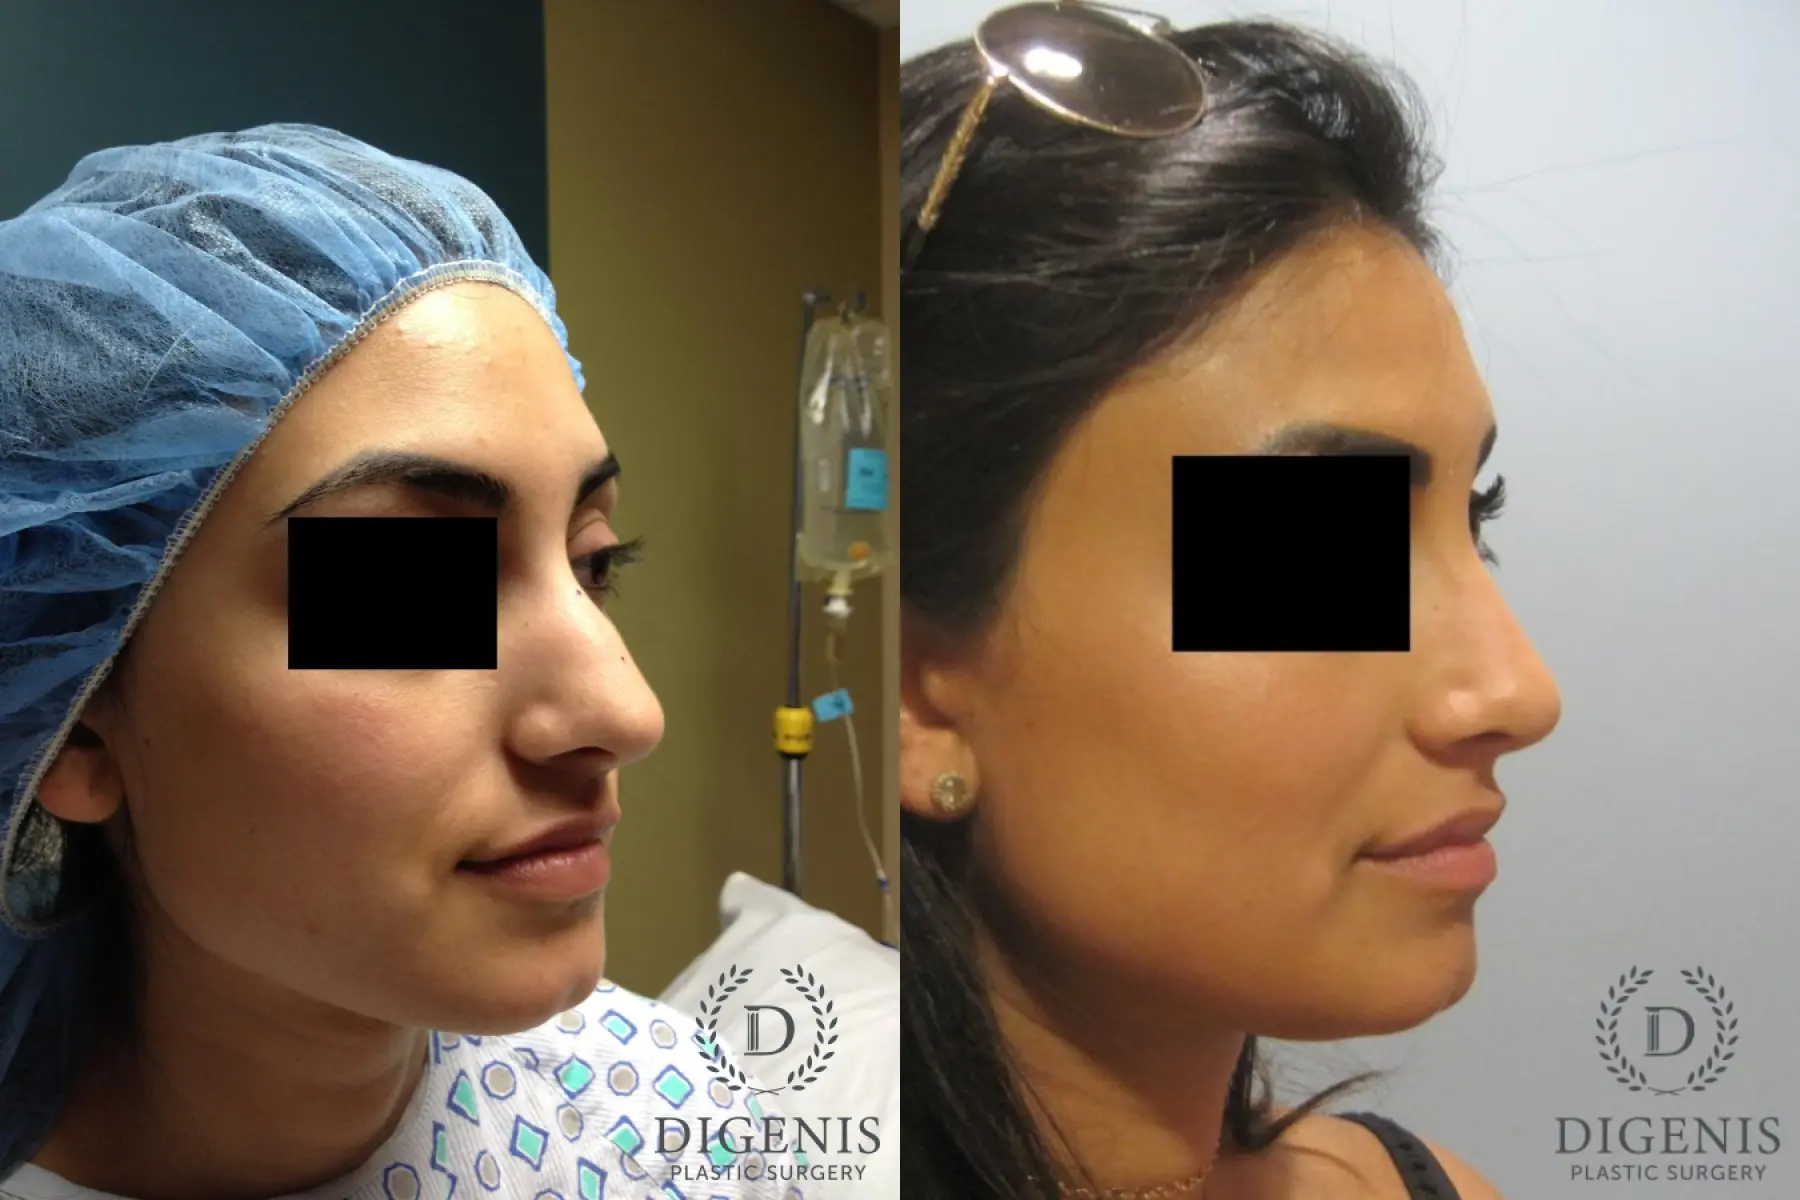 Rhinoplasty: Patient 7 - Before and After 2